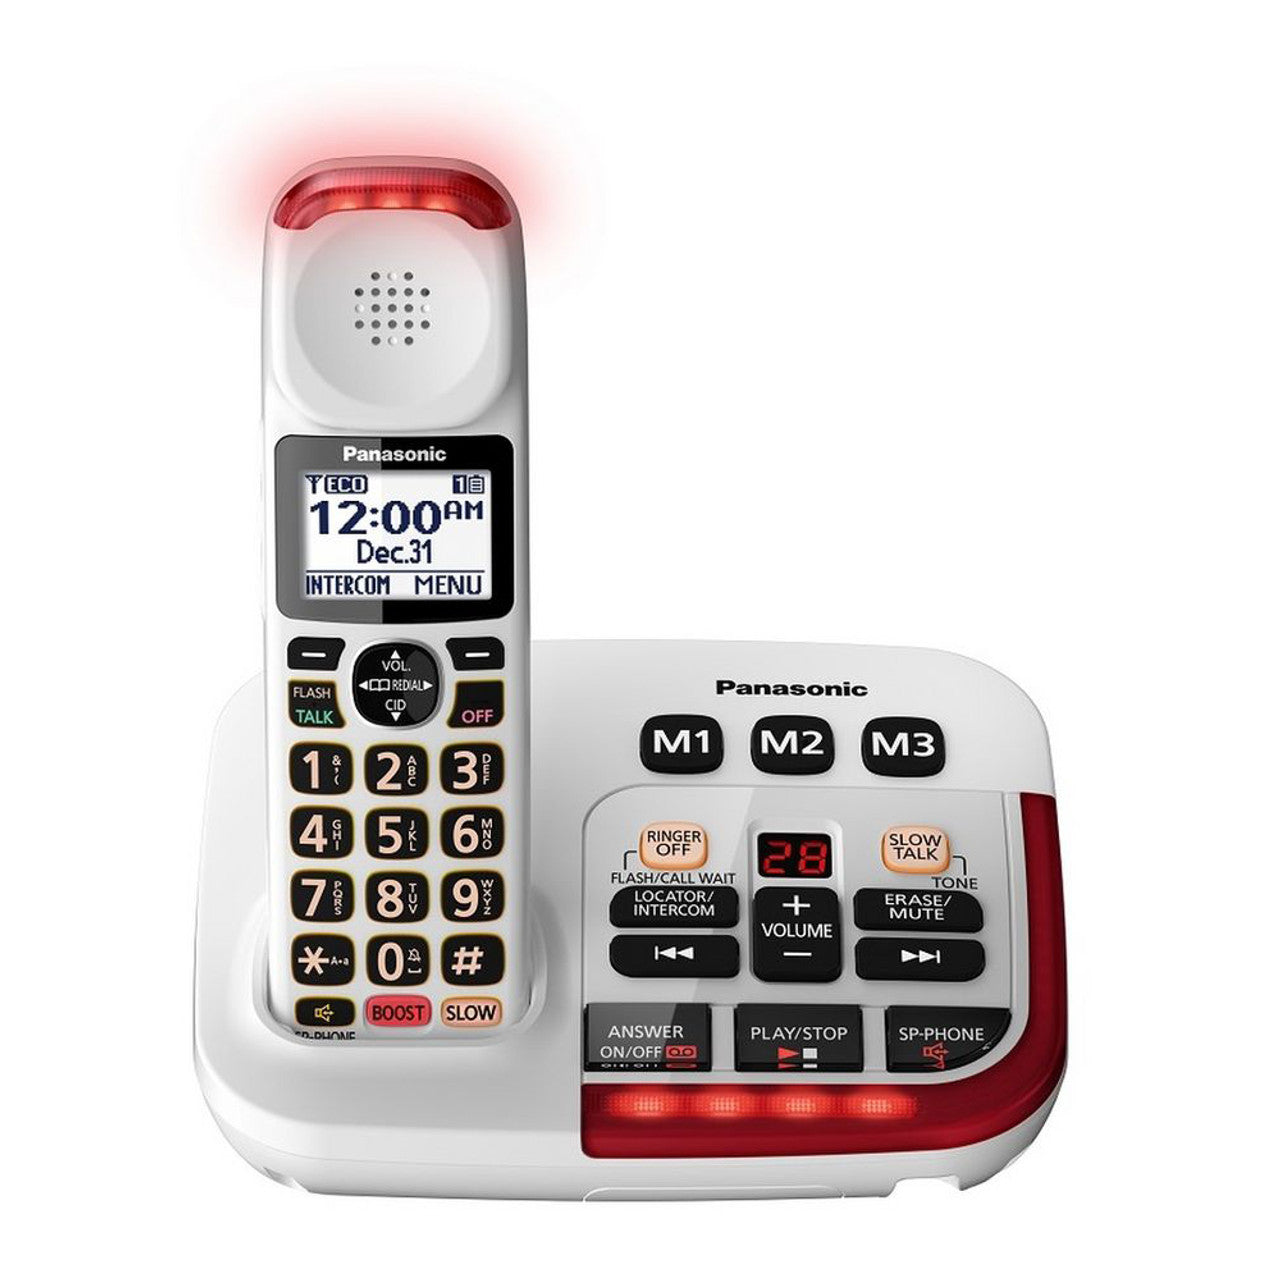 This feature-rich 40dB Phone w/ Caller ID and Answering Machine by Panasonic caters to a wide range of users with low vision or moderate hearing loss.